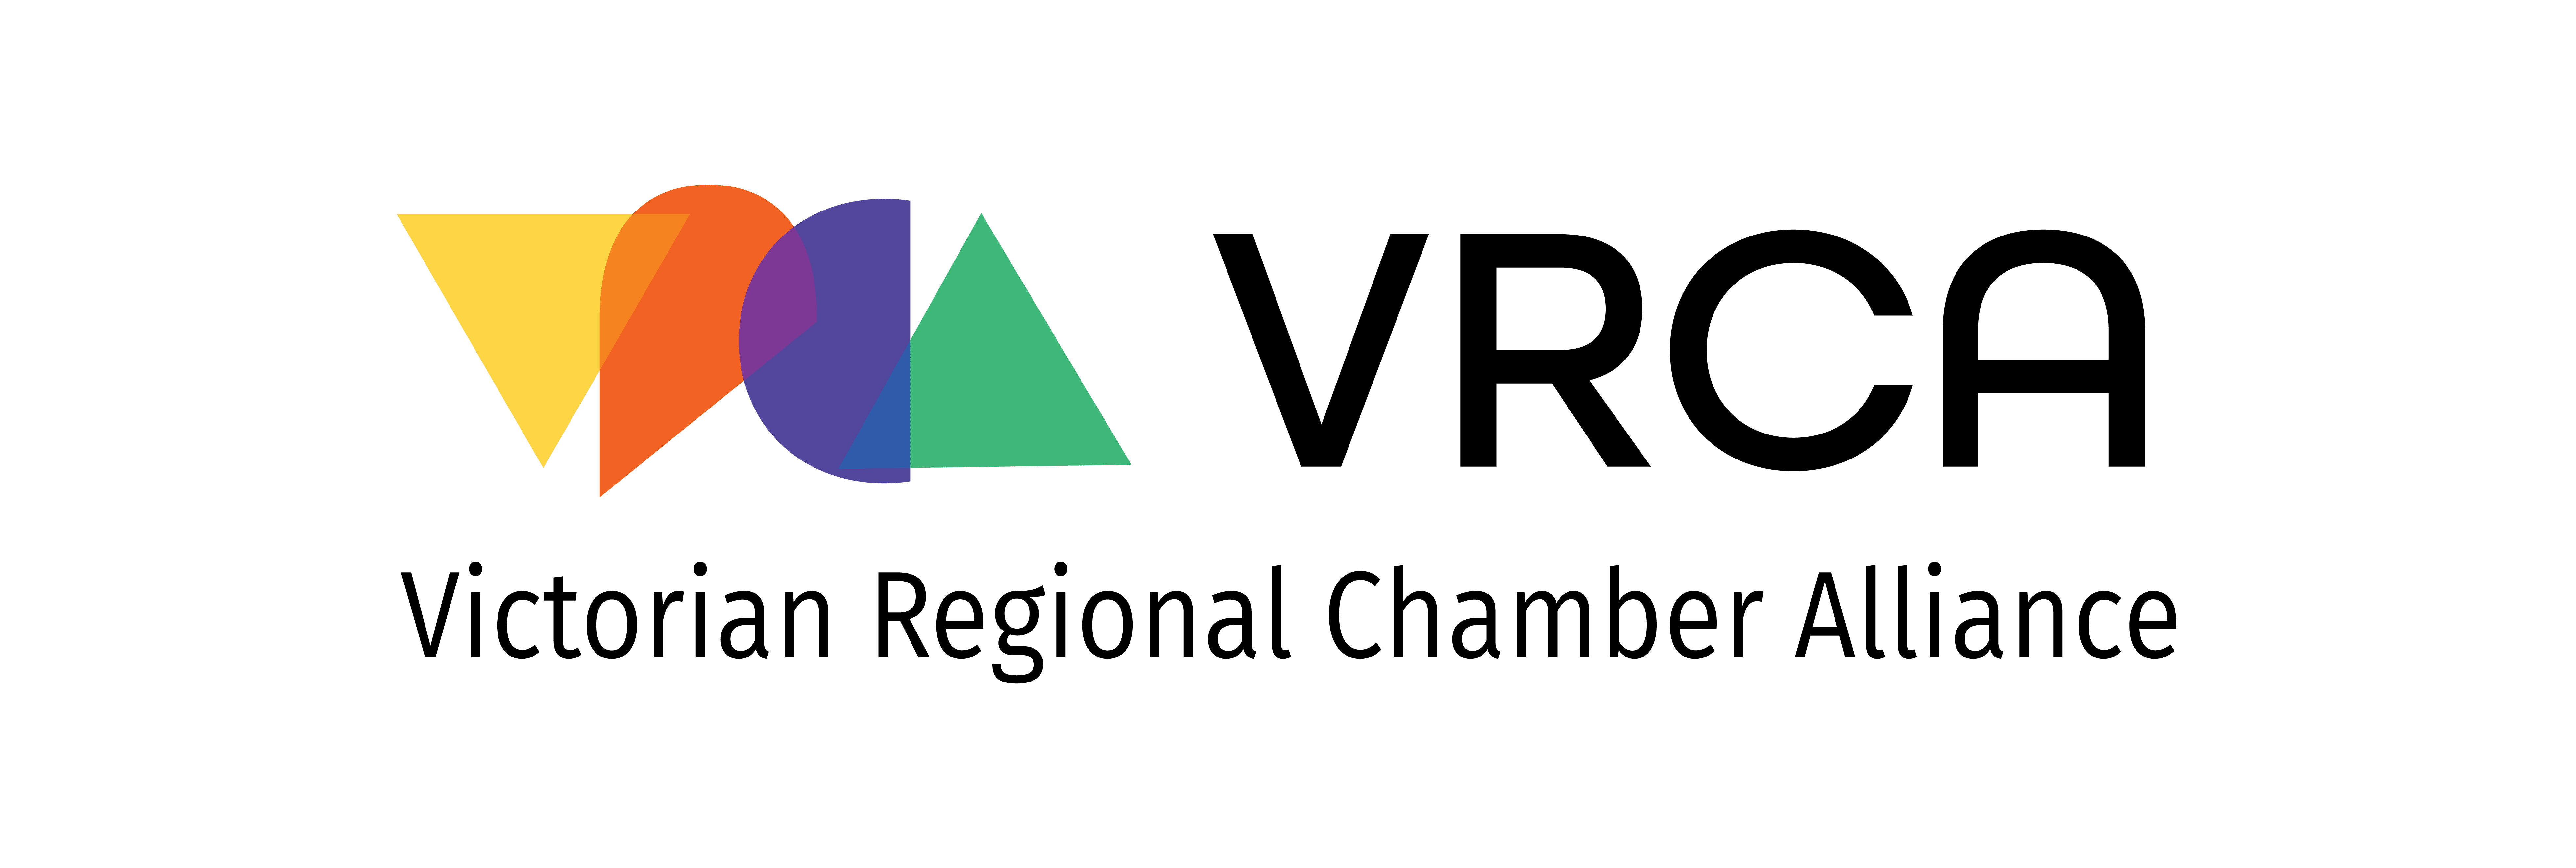 VRCA calls for business reprieve from State Government